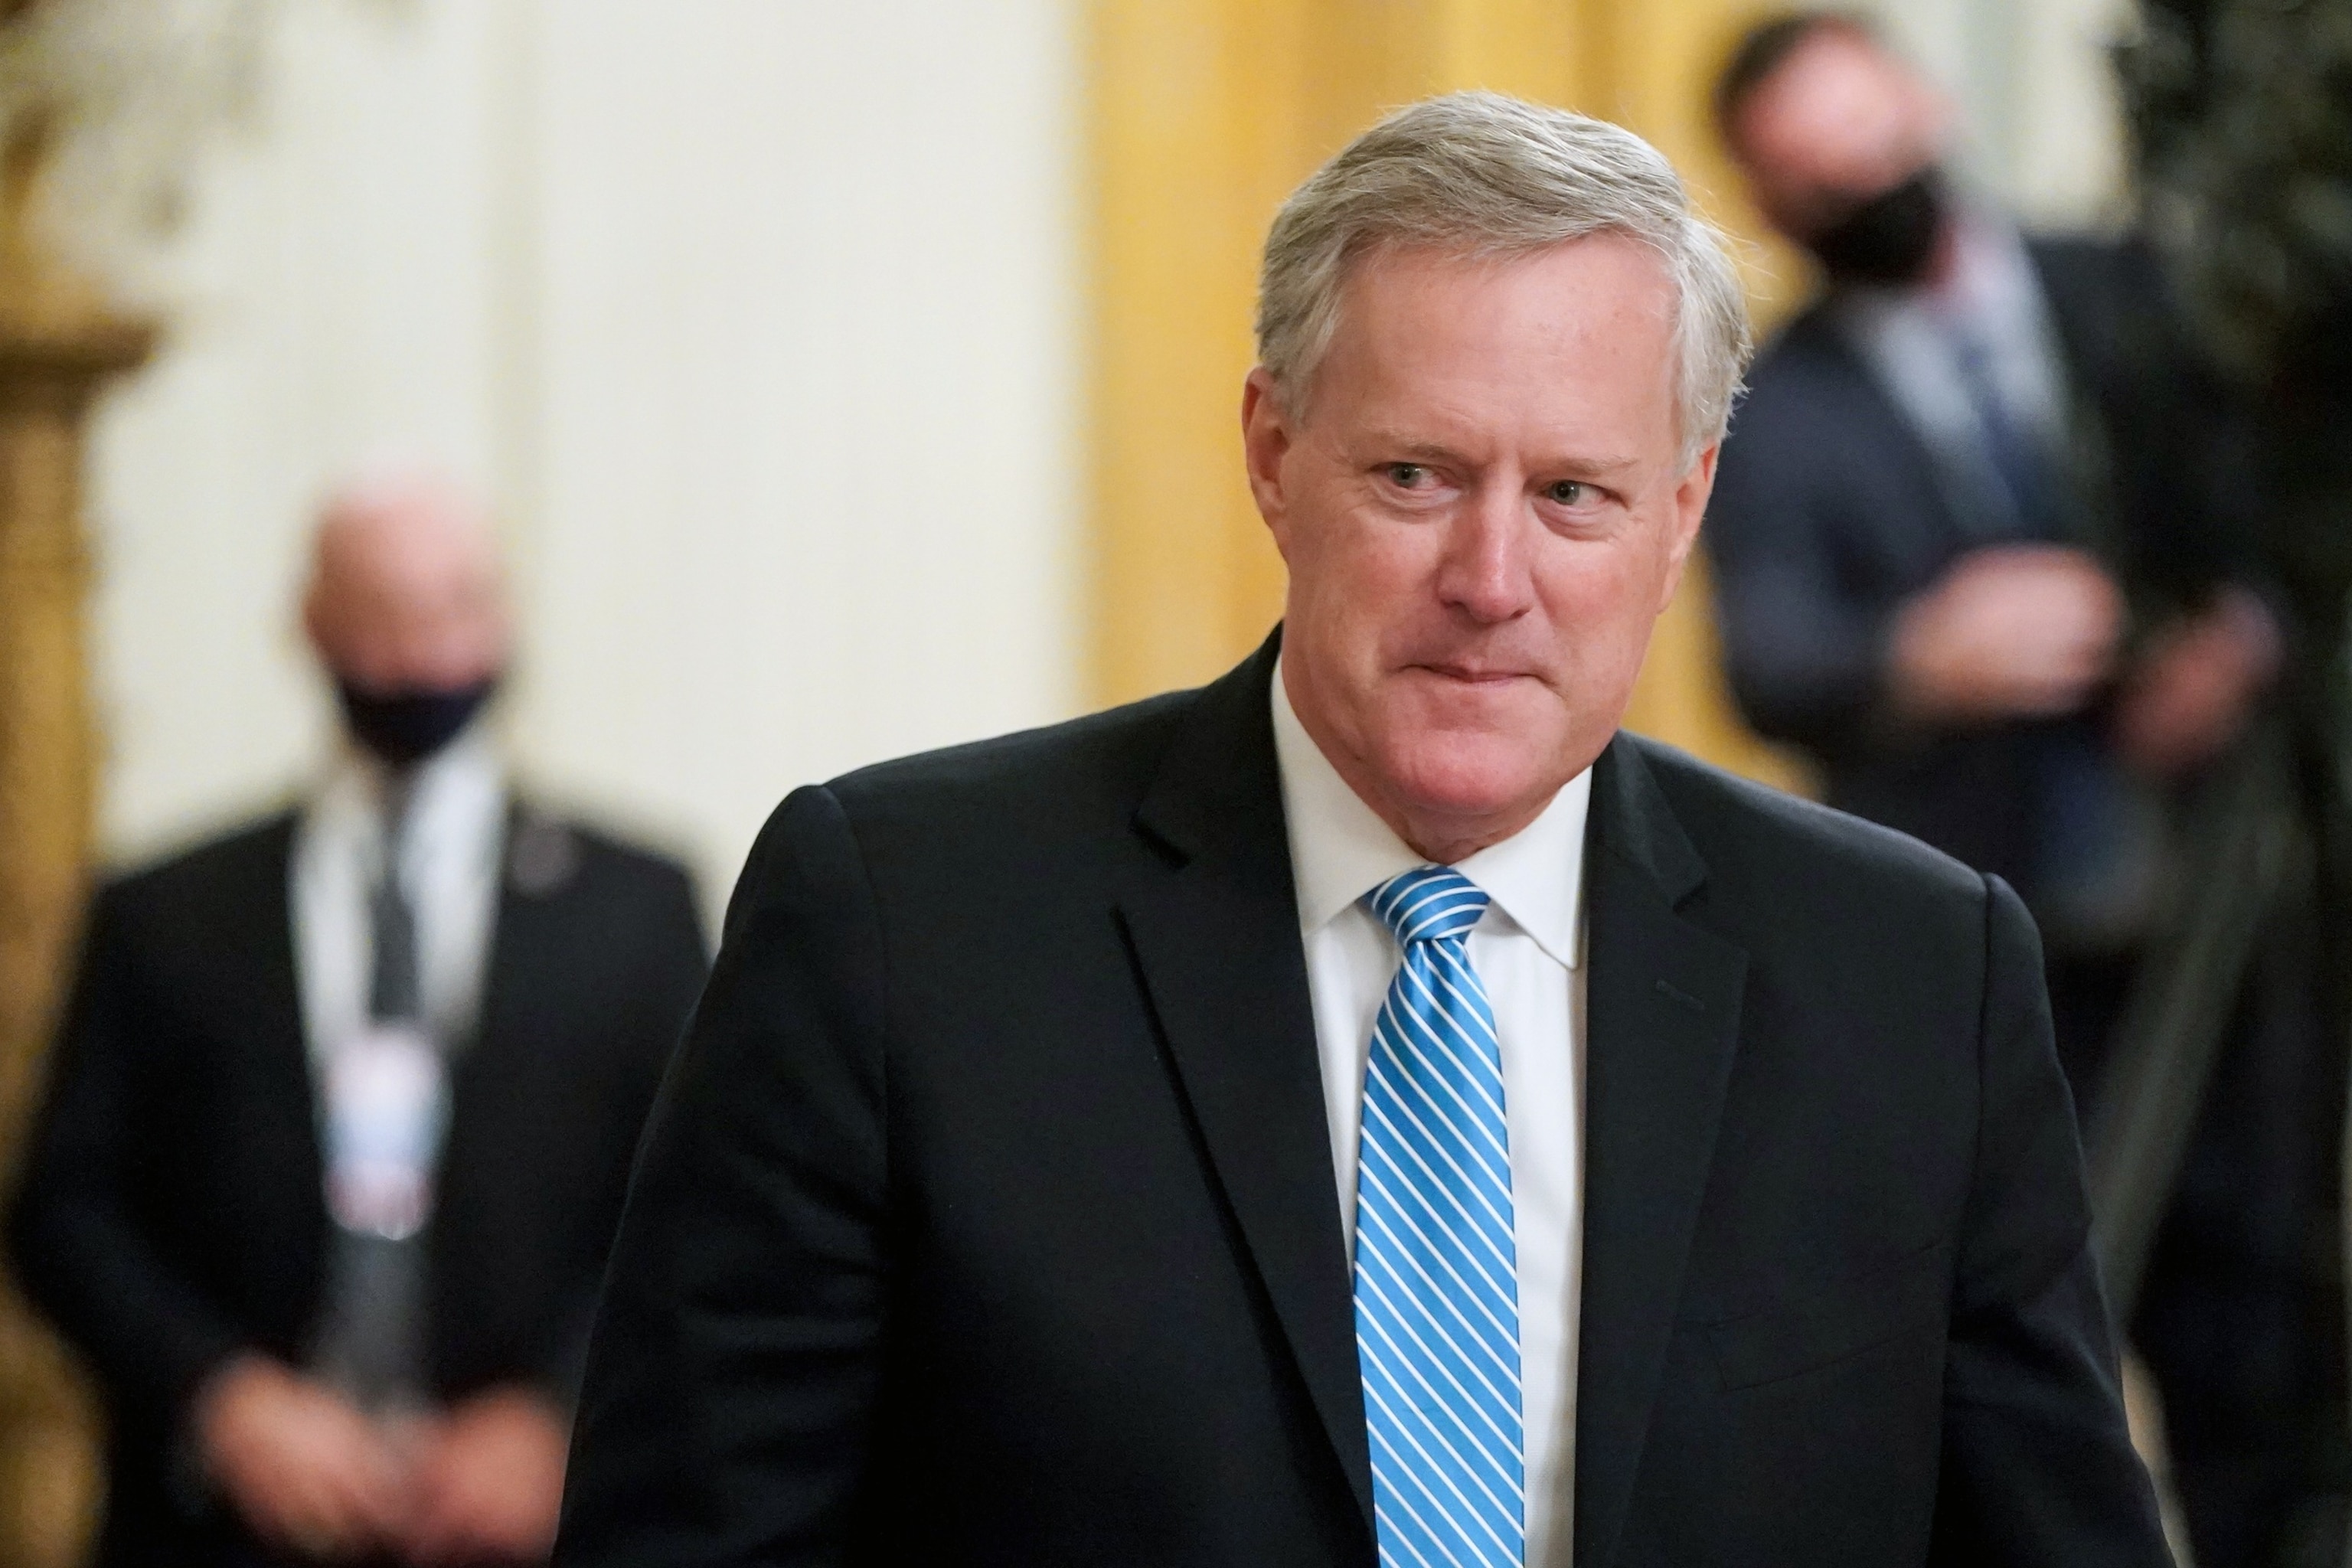 PHOTO: In this Sept. 23, 2020 file photo White House Chief of Staff Mark Meadows departs after President Donald Trump delivered remarks in honor of Bay of Pigs Veterans in the East Room of the White House on in Washington, DC. 